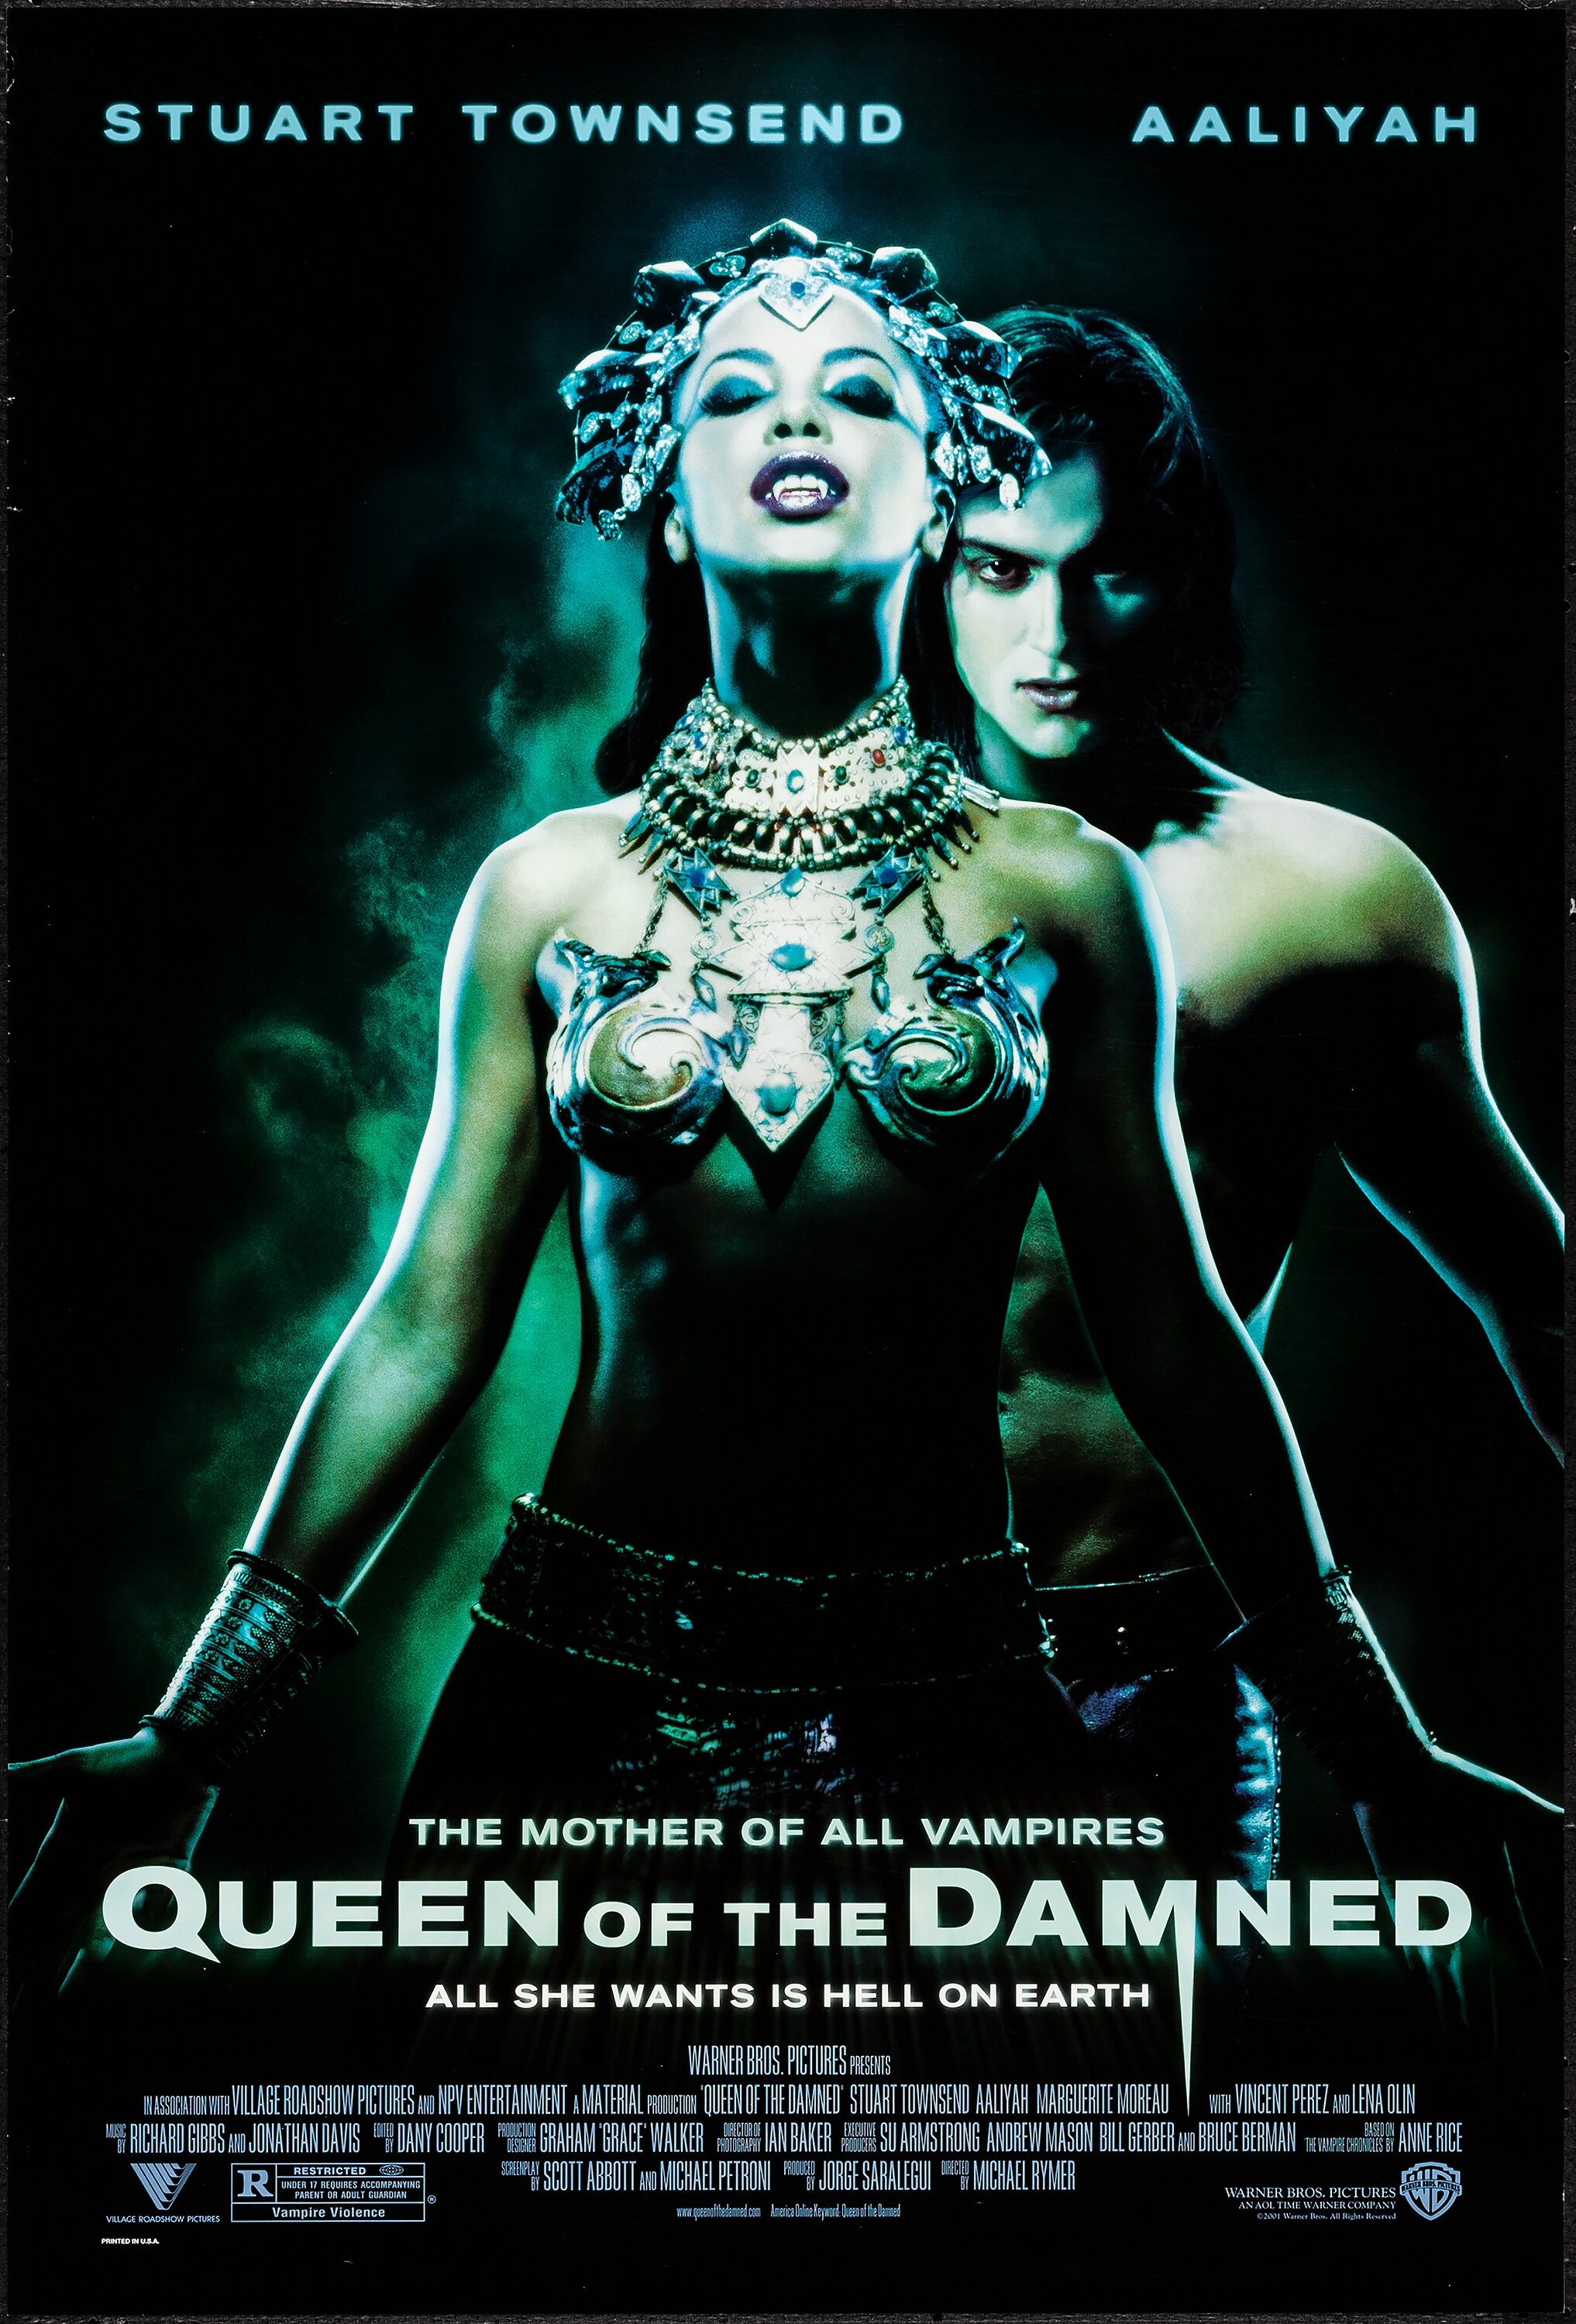 Queen of the Damned & Other Lot (Warner Brothers, 2002). One